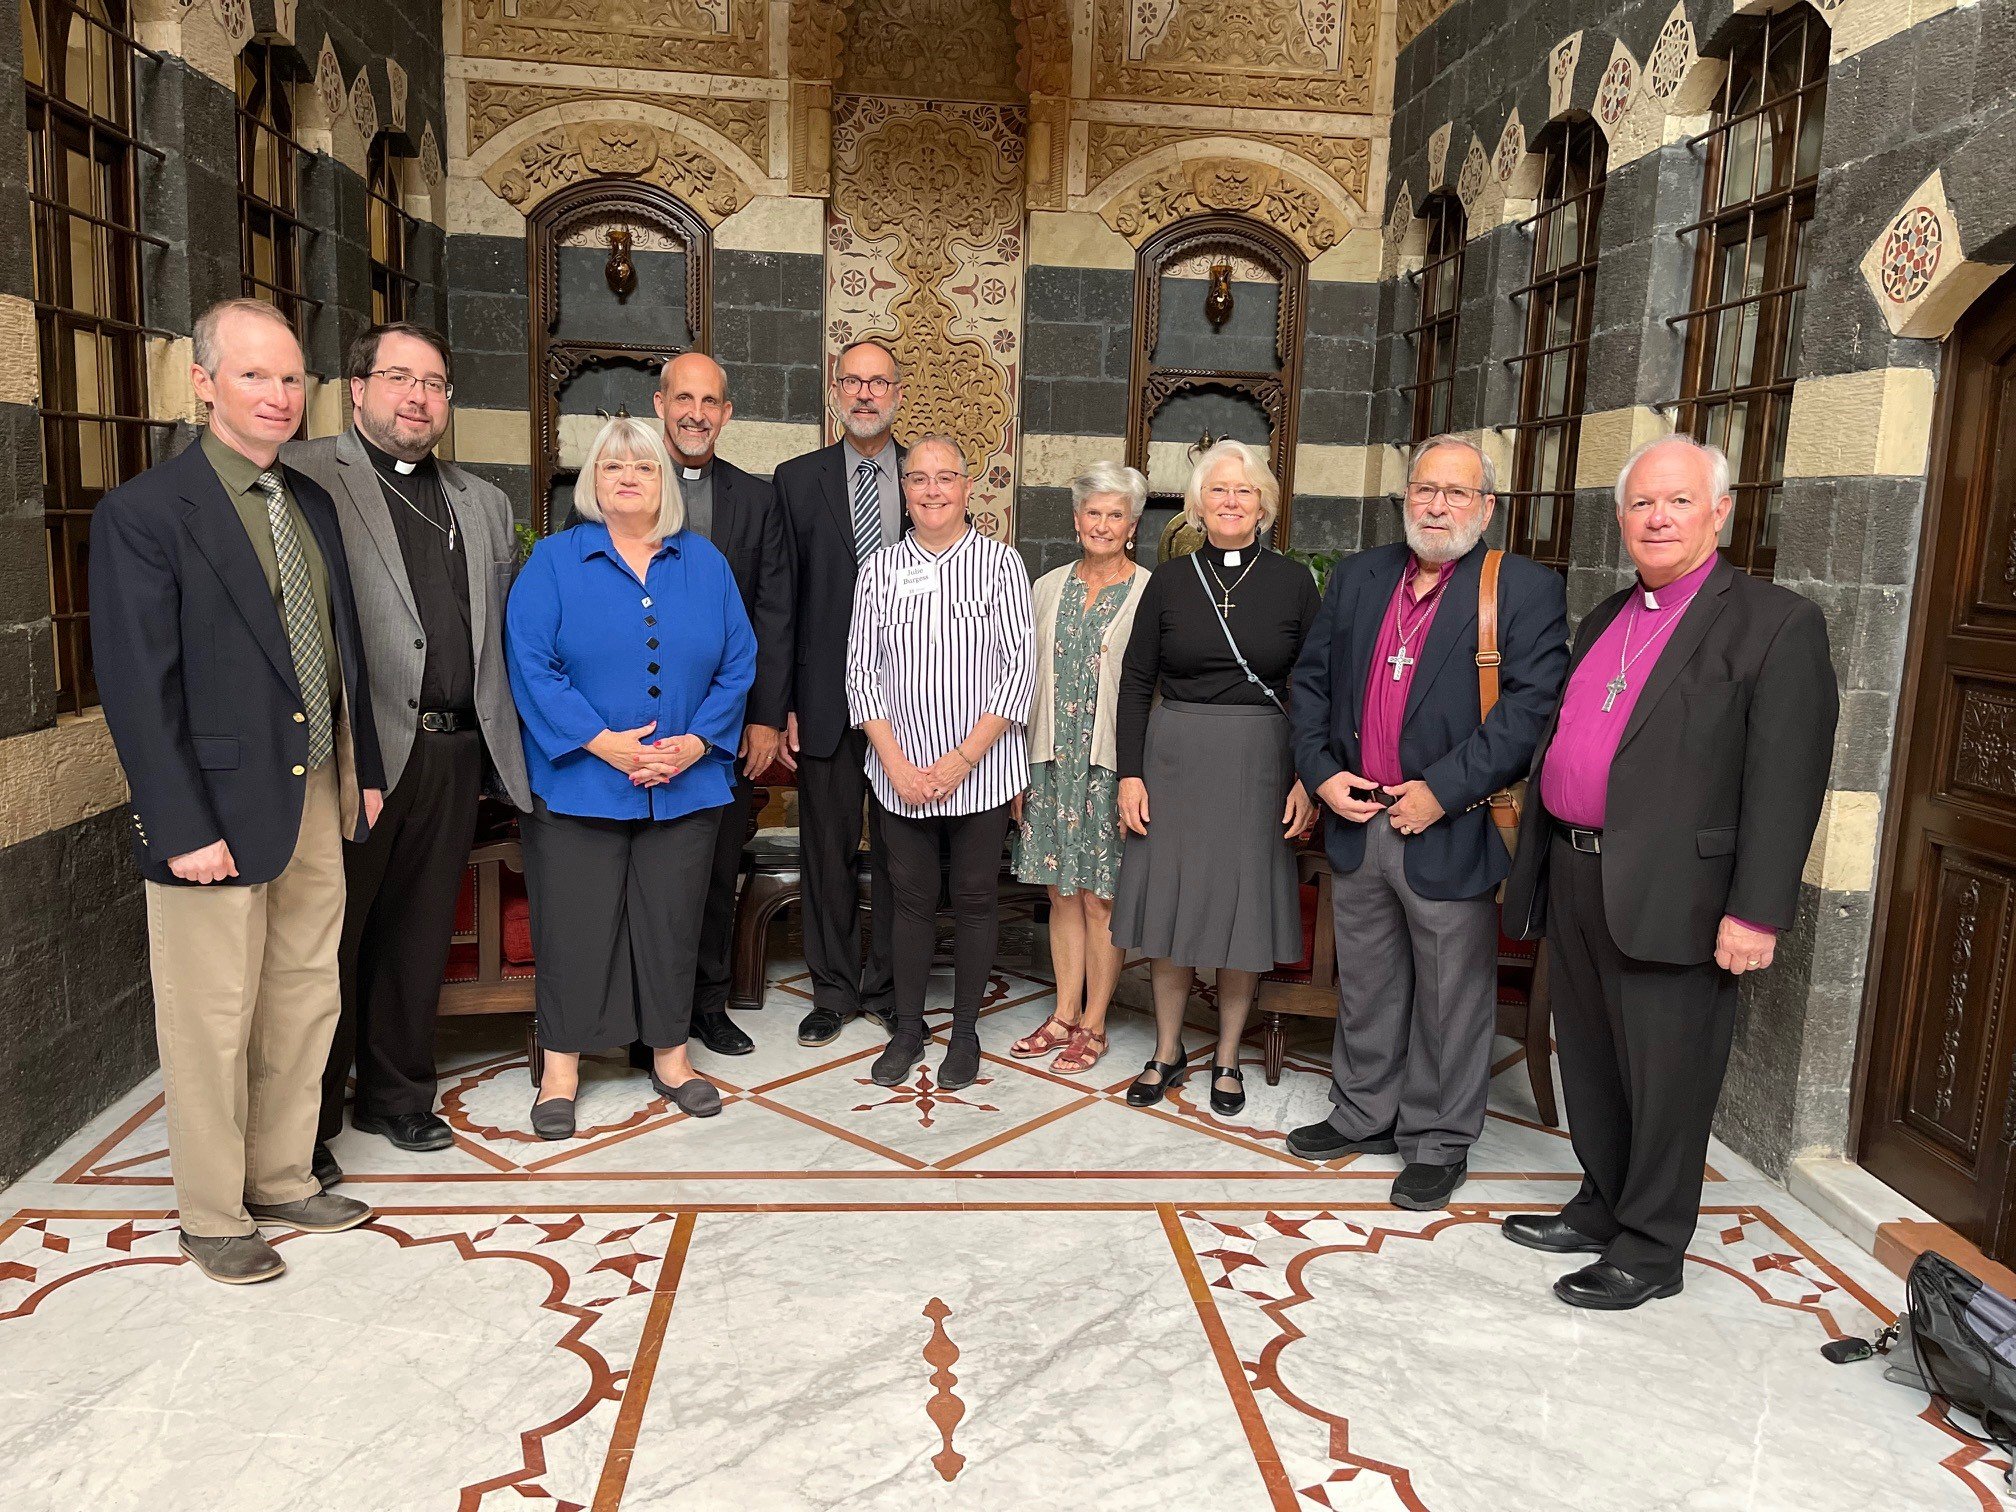  Our team headed to Church on Reformation Sunday (from left to right): Kelly Green, Tony Lorenz, Marilyn Borst, Mike Kuhn, Steve Burgess, Julie Burgess, Lois Andrews, Nancy Fox, Nuhad Tomeh, Jack Baca 